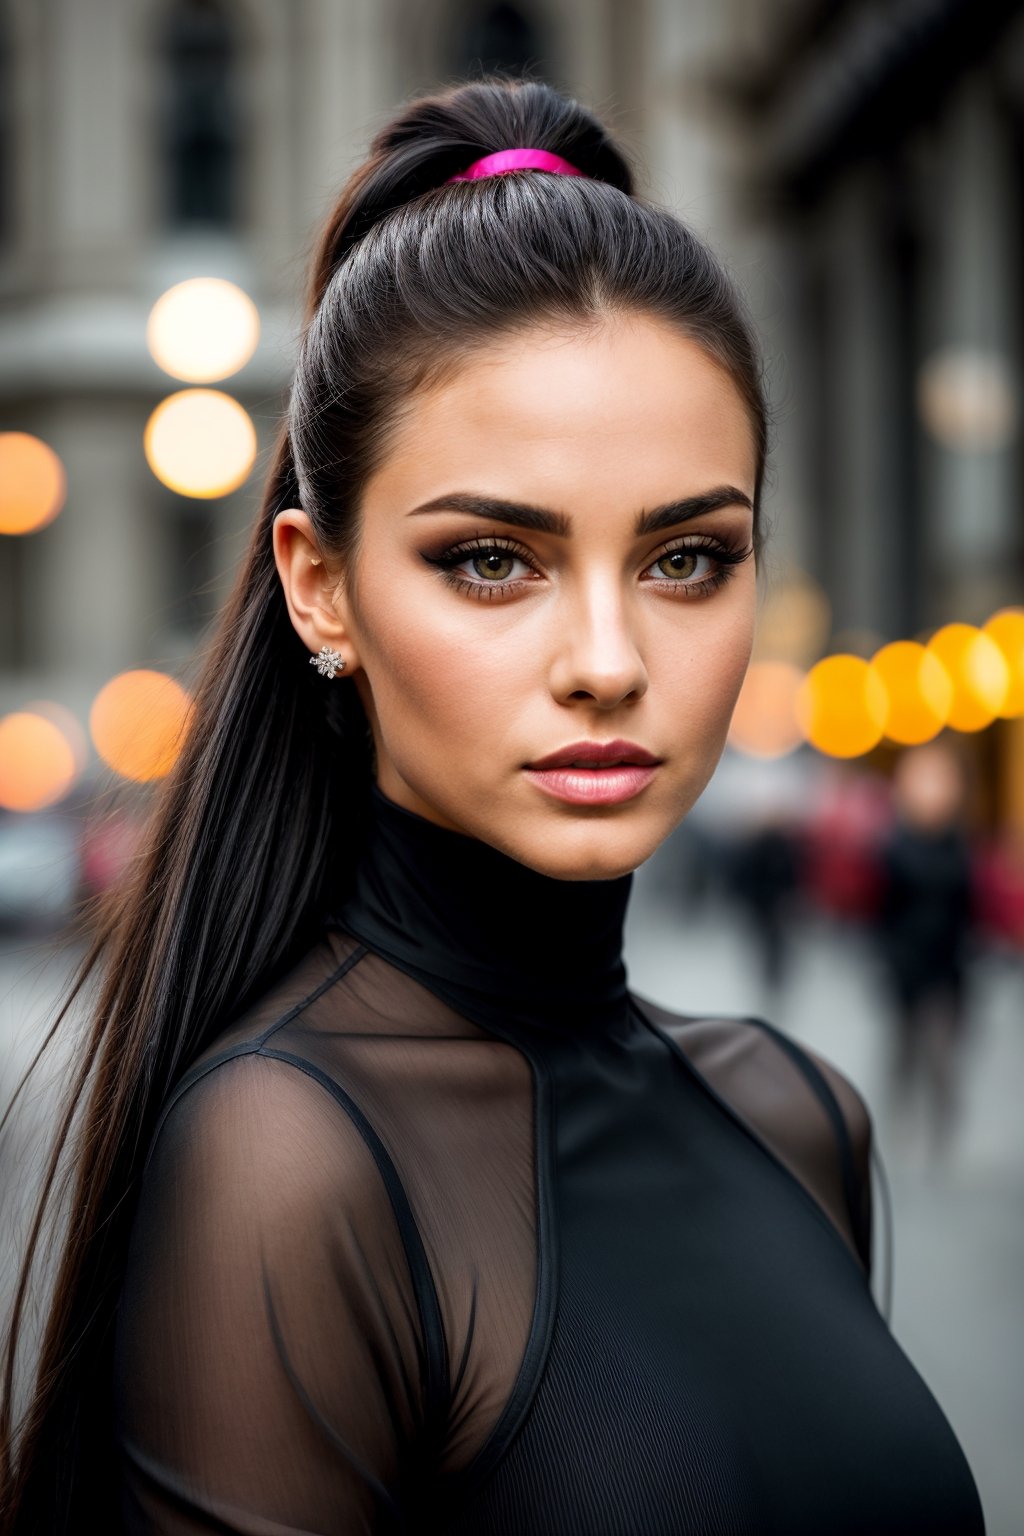 Description:
Generate a stunning and hyper-realistic portrait of the most beautiful woman in the world, featuring cat eyes, European features, and wearing a black bodysuit. Set the scene on a bustling street in London, with bokeh lights twinkling in the background to create an enchanting atmosphere. The woman should have long, jet black hair with neon pink highlights, styled in twin ponytails, and exaggerated eye liner and smokey eyes makeup. Her lips should be full and sensual, complementing her overall allure.

Specific Instructions:

Render the woman with European features and white skin, capturing her exquisite beauty and elegance. Ensure her facial structure is refined and symmetrical, with defined cheekbones, a slender jawline, and high, arched brows.
Emphasize the woman's cat eyes, giving her a distinct feline appearance. The pupils should be elongated, with a clear iris line visible within each eye. The eyes should exude mystery and allure, captivating the viewer's attention.
Style the woman's long, jet black hair in twin ponytails with neon pink highlights, adding a modern twist to her classic elegance. Render each strand with meticulous detail, capturing the texture and movement of her luxurious locks.
Apply exaggerated eye liner and smokey eyes makeup to enhance the woman's mesmerizing gaze, creating depth and intensity that draws the viewer in. Use dark, sultry colors to accentuate the cat-like qualities of her eyes.
Sculpt the woman's lips to be full and sensual, with a natural color that complements her overall look. Enhance the lips with a glossy finish to accentuate their plushness and sensuality.
Dress the woman in a sleek black bodysuit that hugs her curves and accentuates her figure. Ensure the bodysuit is tailored to perfection, with subtle detailing that adds visual interest without detracting from the woman's natural beauty.
Place the woman in a dynamic pose within a bustling street in London, surrounded by the hustle and bustle of city life. Use bokeh lights in the background to create a sense of depth and atmosphere, adding to the enchanting ambiance of the scene.
Illuminate the portrait with soft, diffused lighting that highlights the woman's features and enhances her radiant beauty. Use strategic lighting to create depth and dimension, sculpting her form and adding a sense of realism to the scene.
Additional Guidelines:

Research cat eye anatomy to ensure authenticity and accuracy in depicting the woman's eyes.
Experiment with different artistic techniques and visual effects to achieve the desired level of realism and impact, whether through digital painting, photorealistic rendering, or detailed shading and texturing.
Consider the emotional resonance and narrative potential of the scene, exploring themes of beauty, mystery, and urban sophistication in the vibrant city of London.